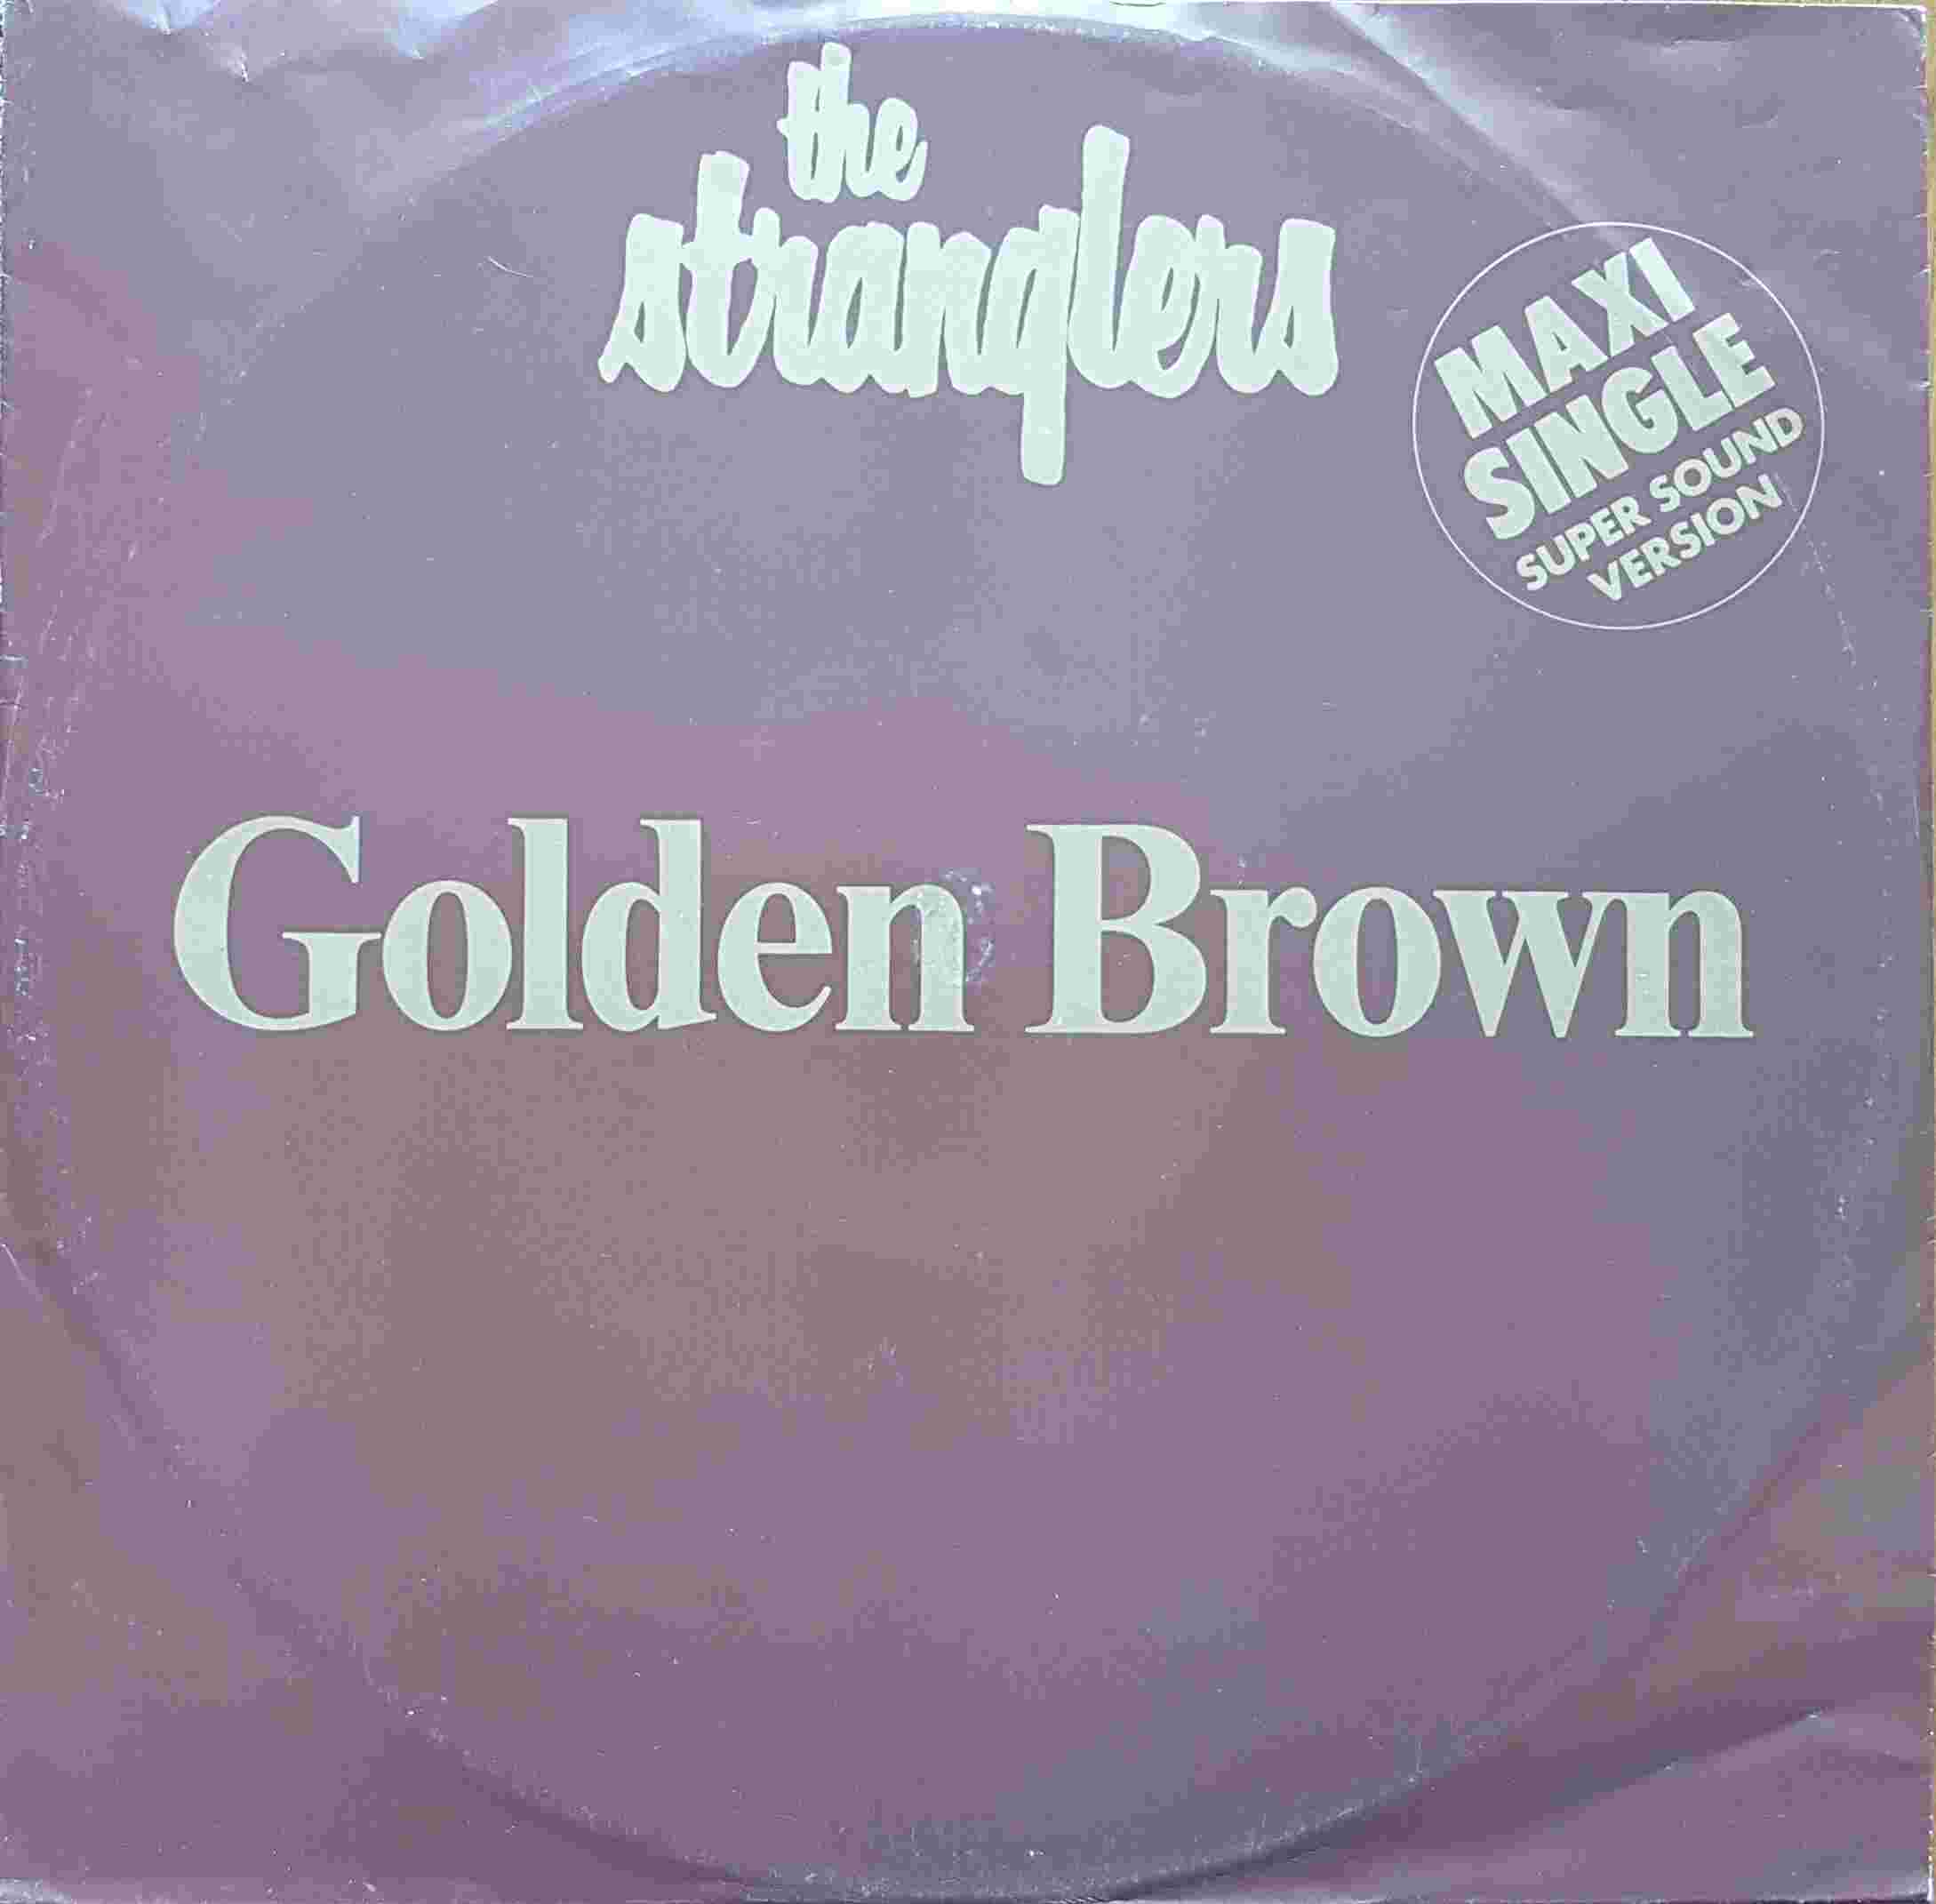 Picture of 052 - 83255 Golden brown by artist The Stranglers